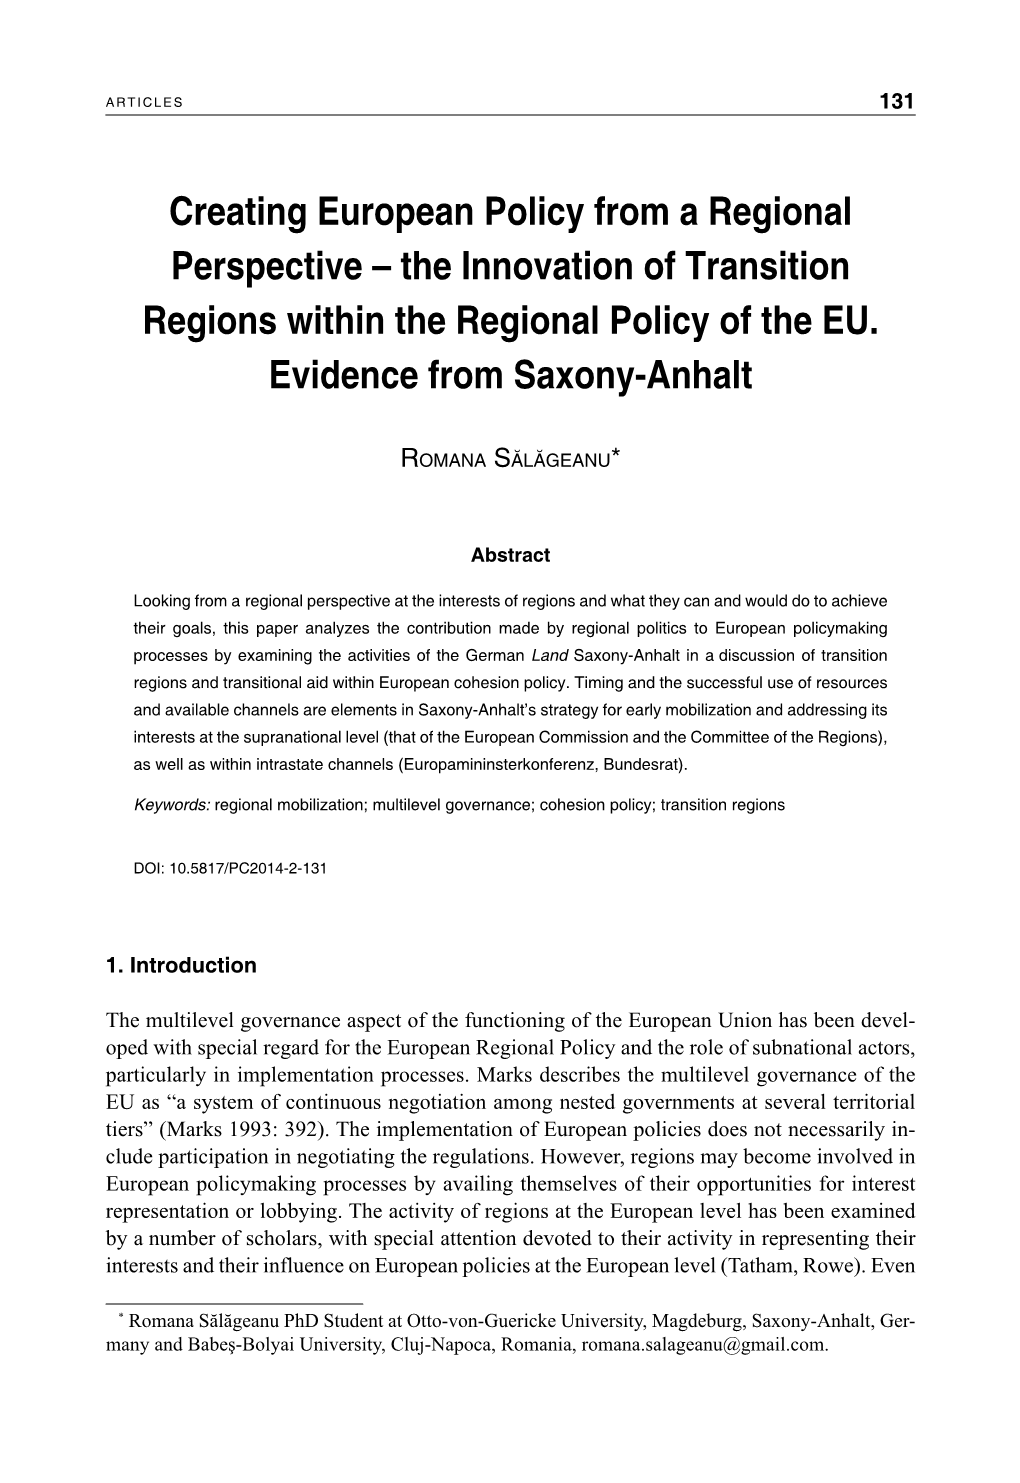 The Innovation of Transition Regions Within the Regional Policy of the EU